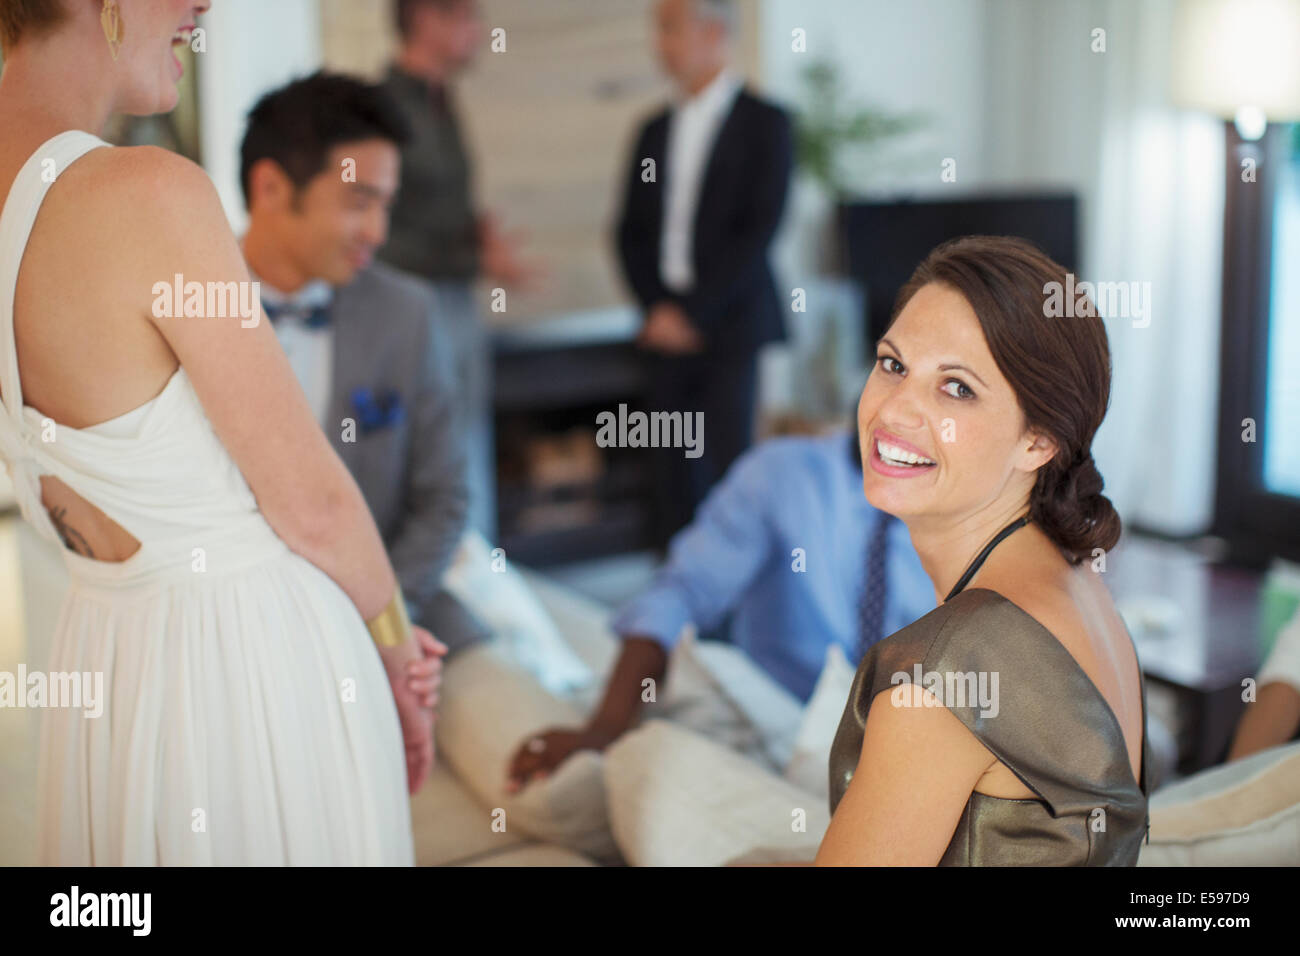 Woman smiling on sofa at party Stock Photo